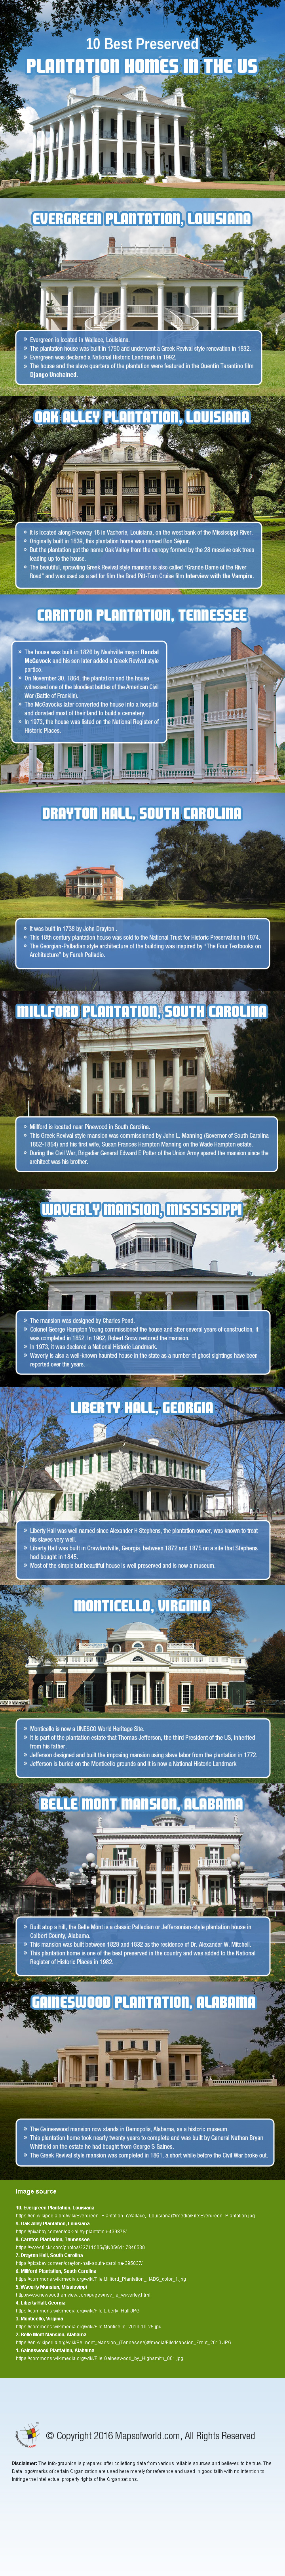 Infographic on 10 Best Preserved Plantation Homes In The US